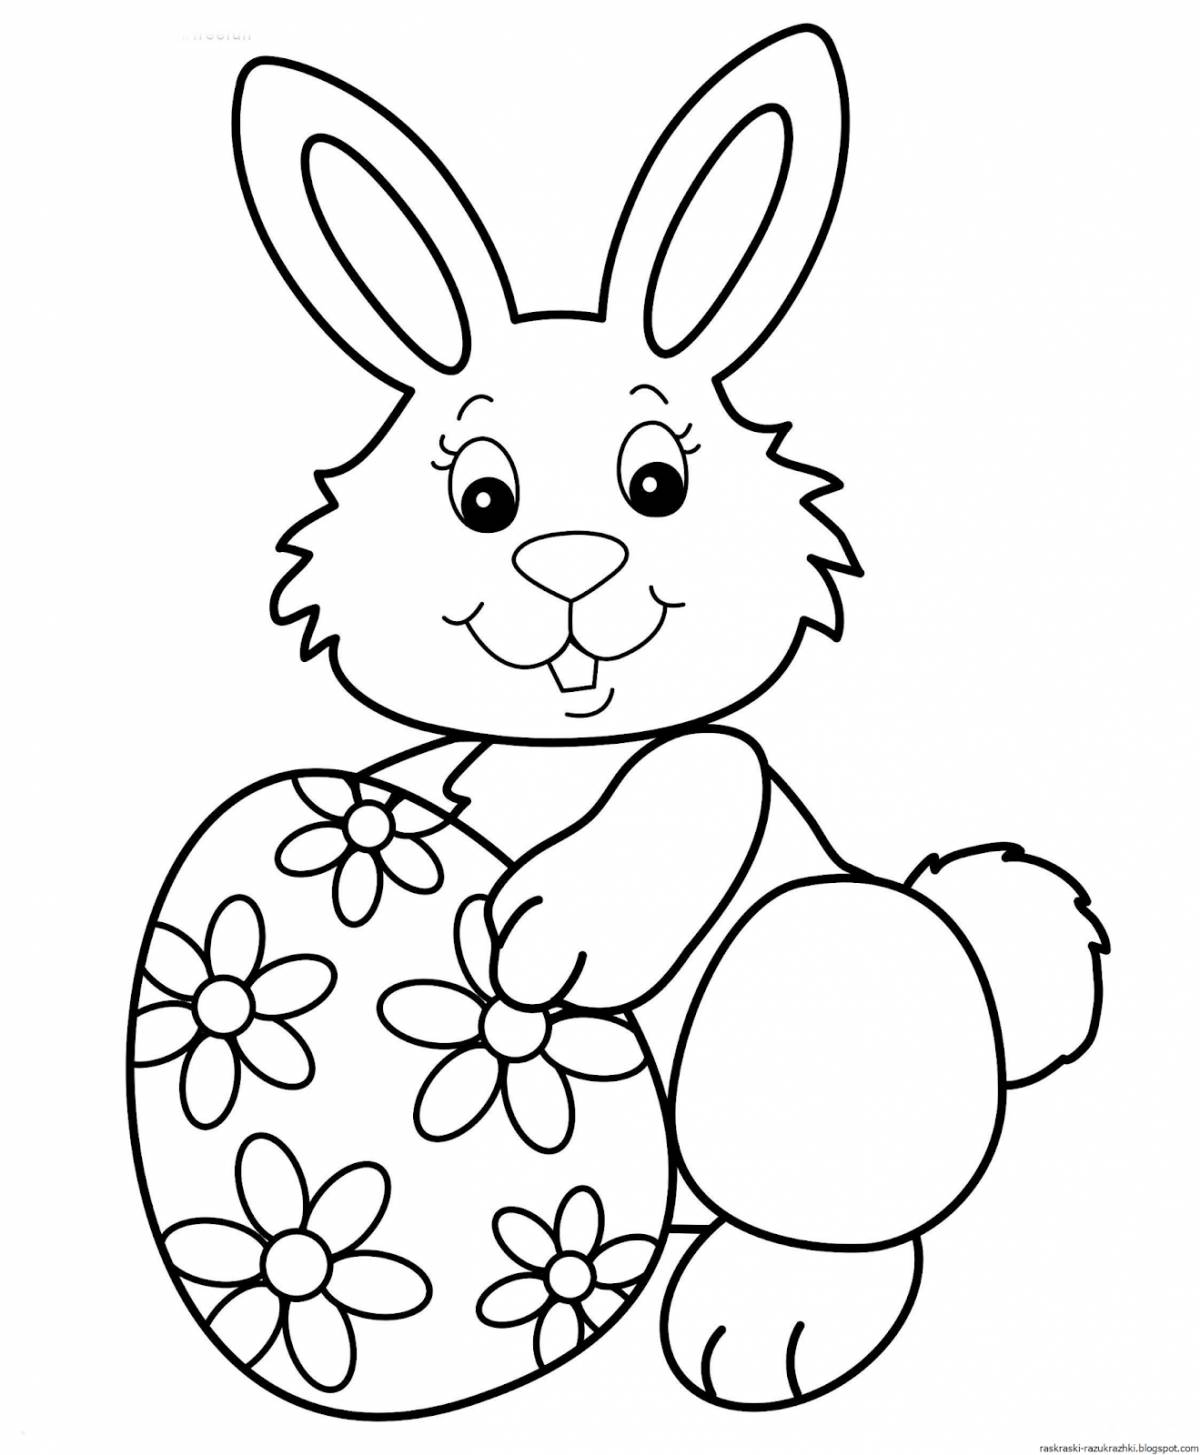 Fascinating rabbit coloring book for kids 3-4 years old